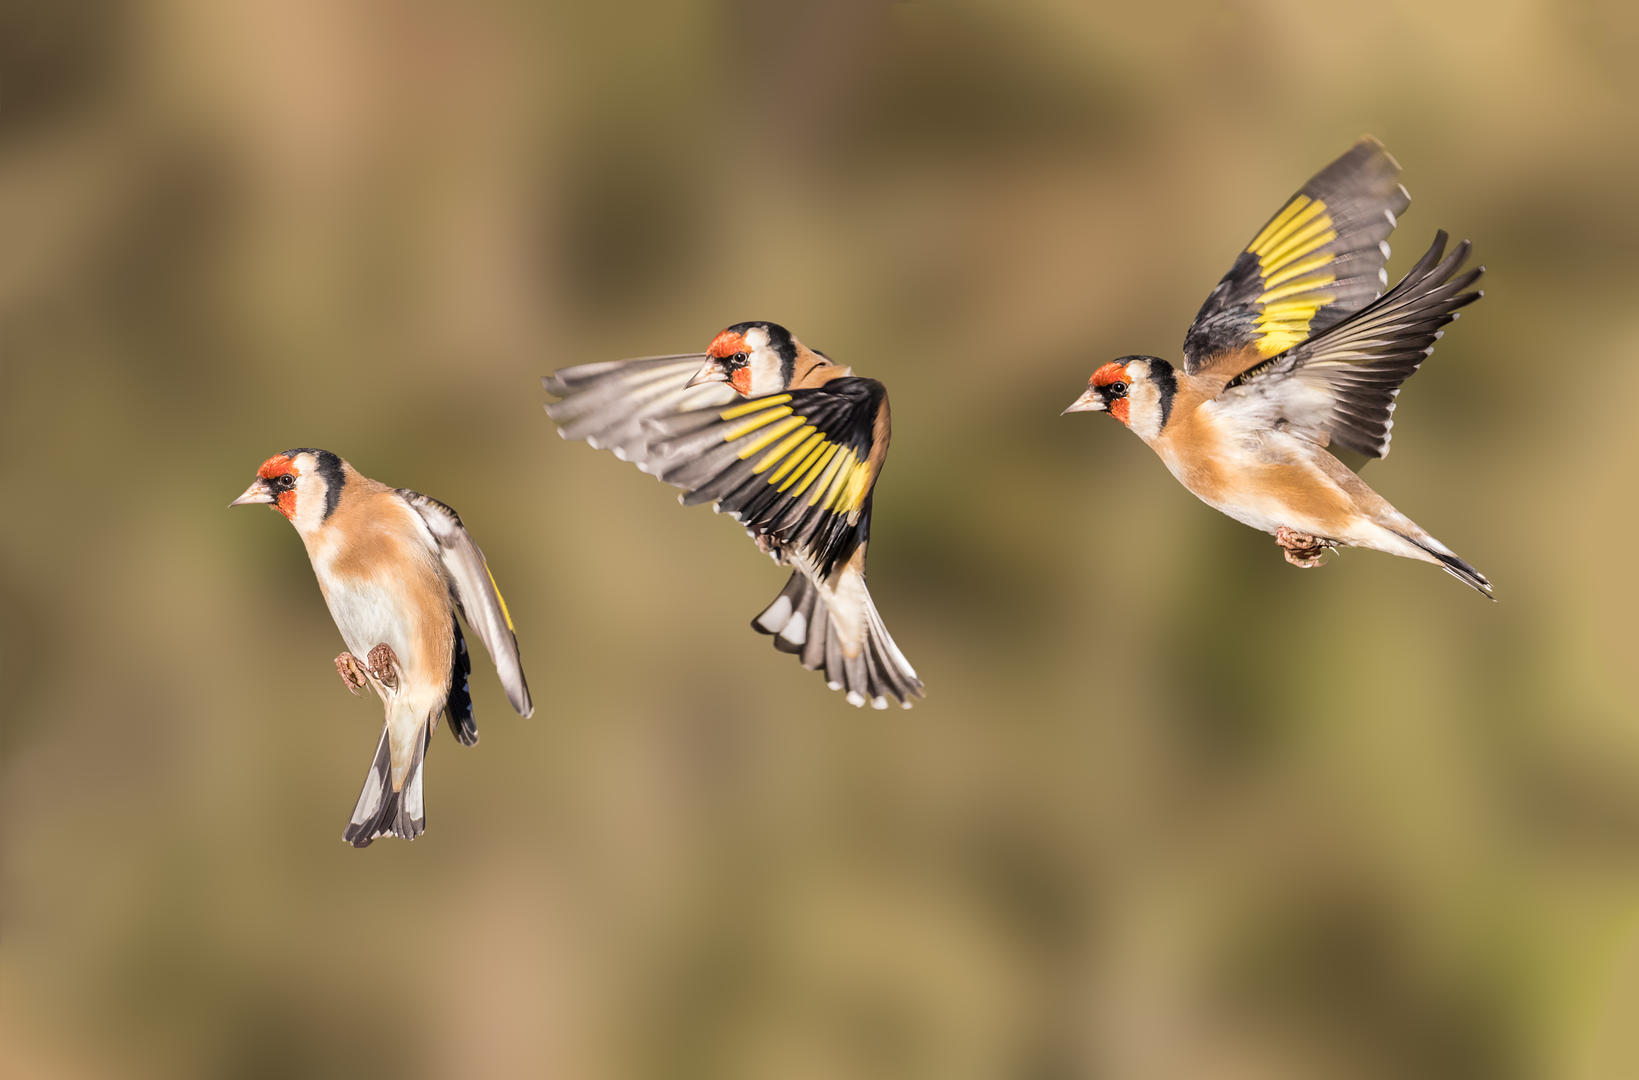 22 Tips for Photographing Birds in Flight | Photocrowd Photography ...